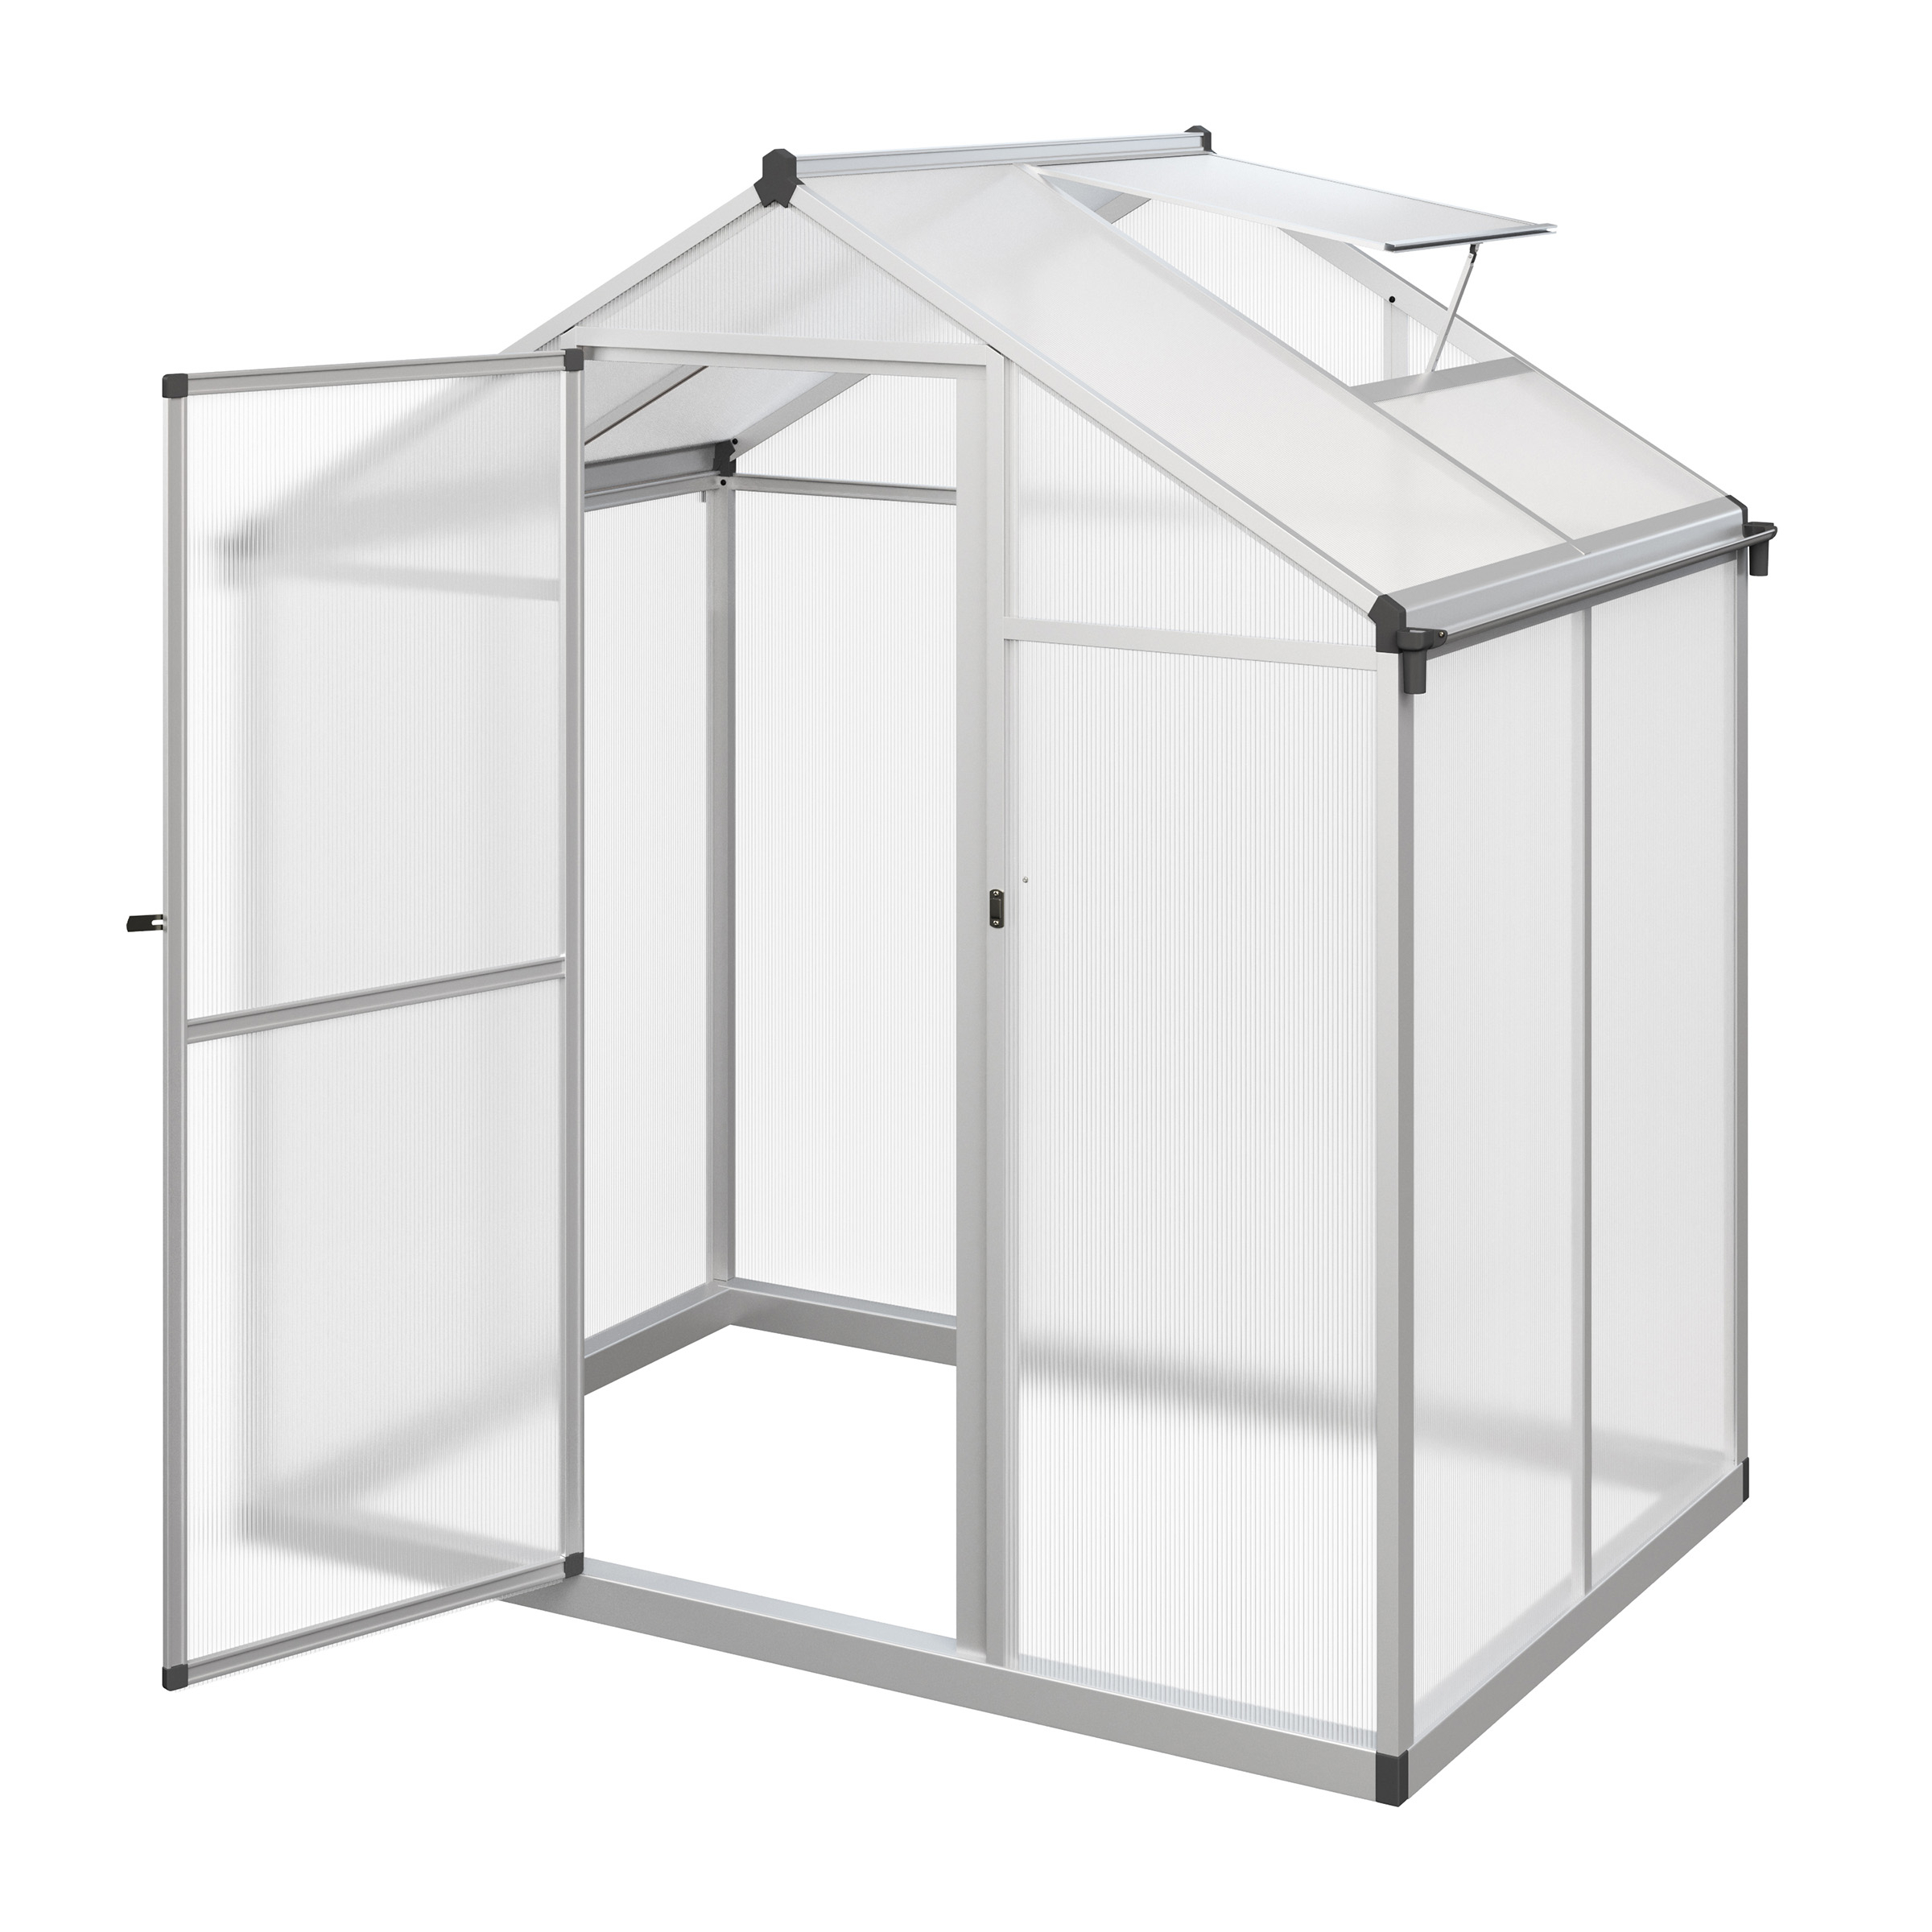 Walk In Greenhouse - 4ft X 6ft Outdoor Green House With Roof Vent And Rain Gutter - Sturdy Polycarbonate Panels With Aluminum Frame